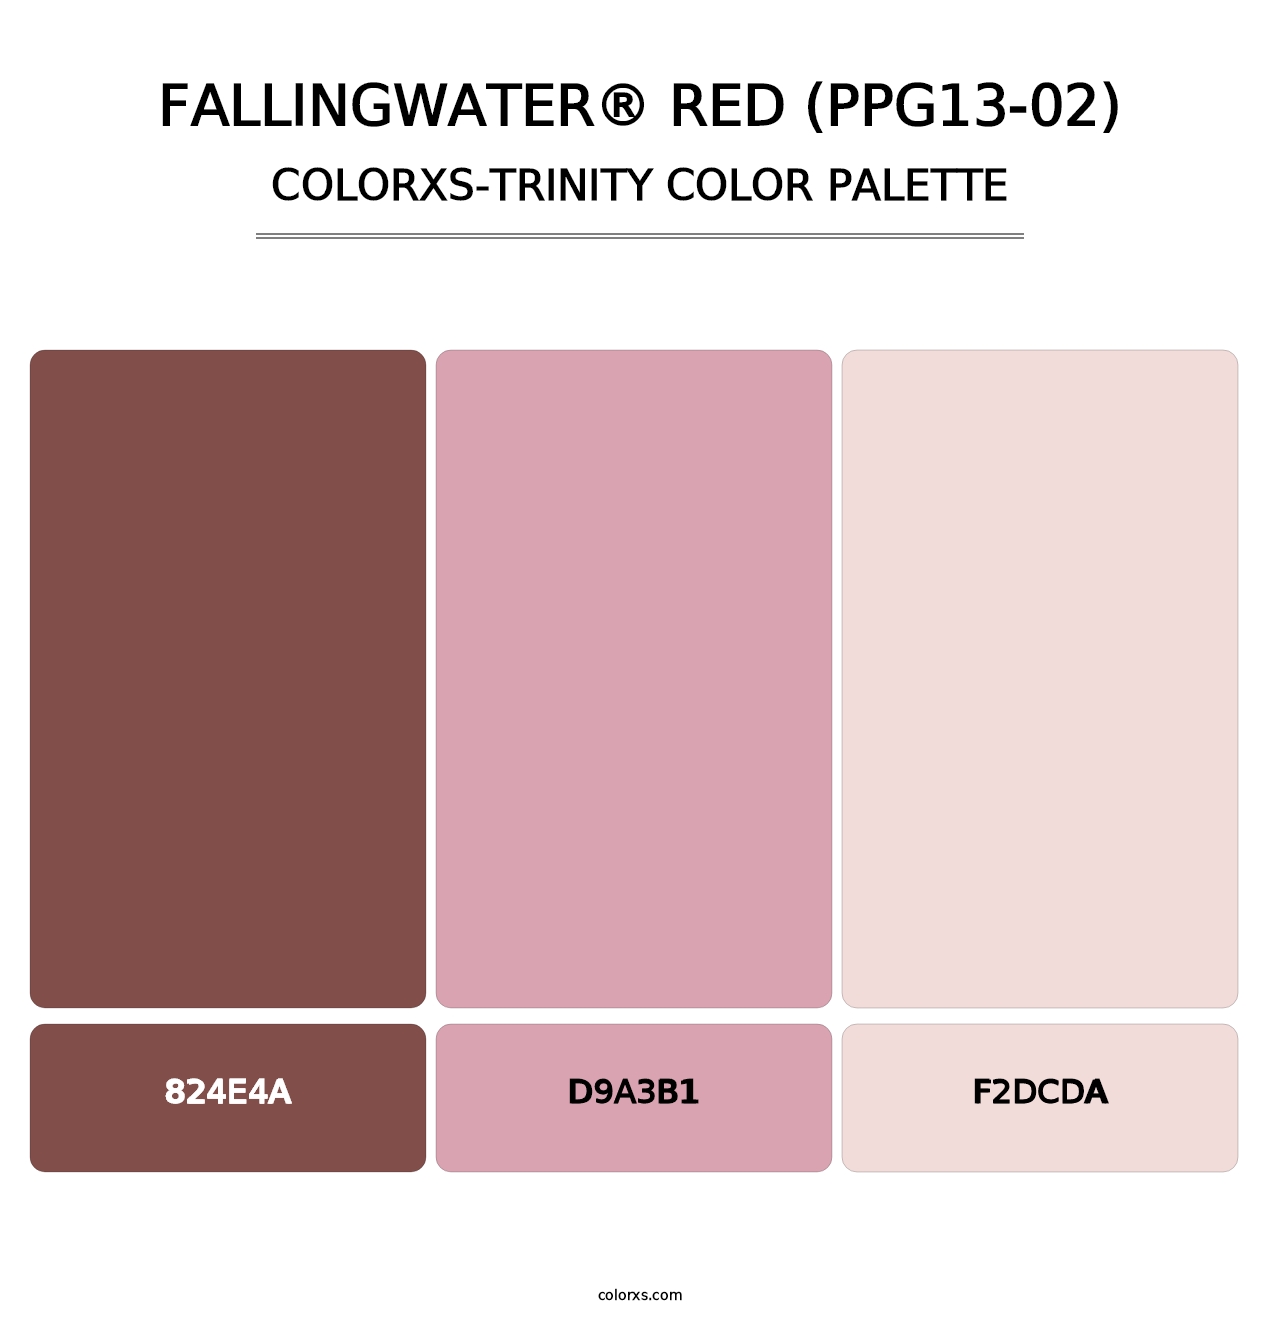 Fallingwater® Red (PPG13-02) - Colorxs Trinity Palette